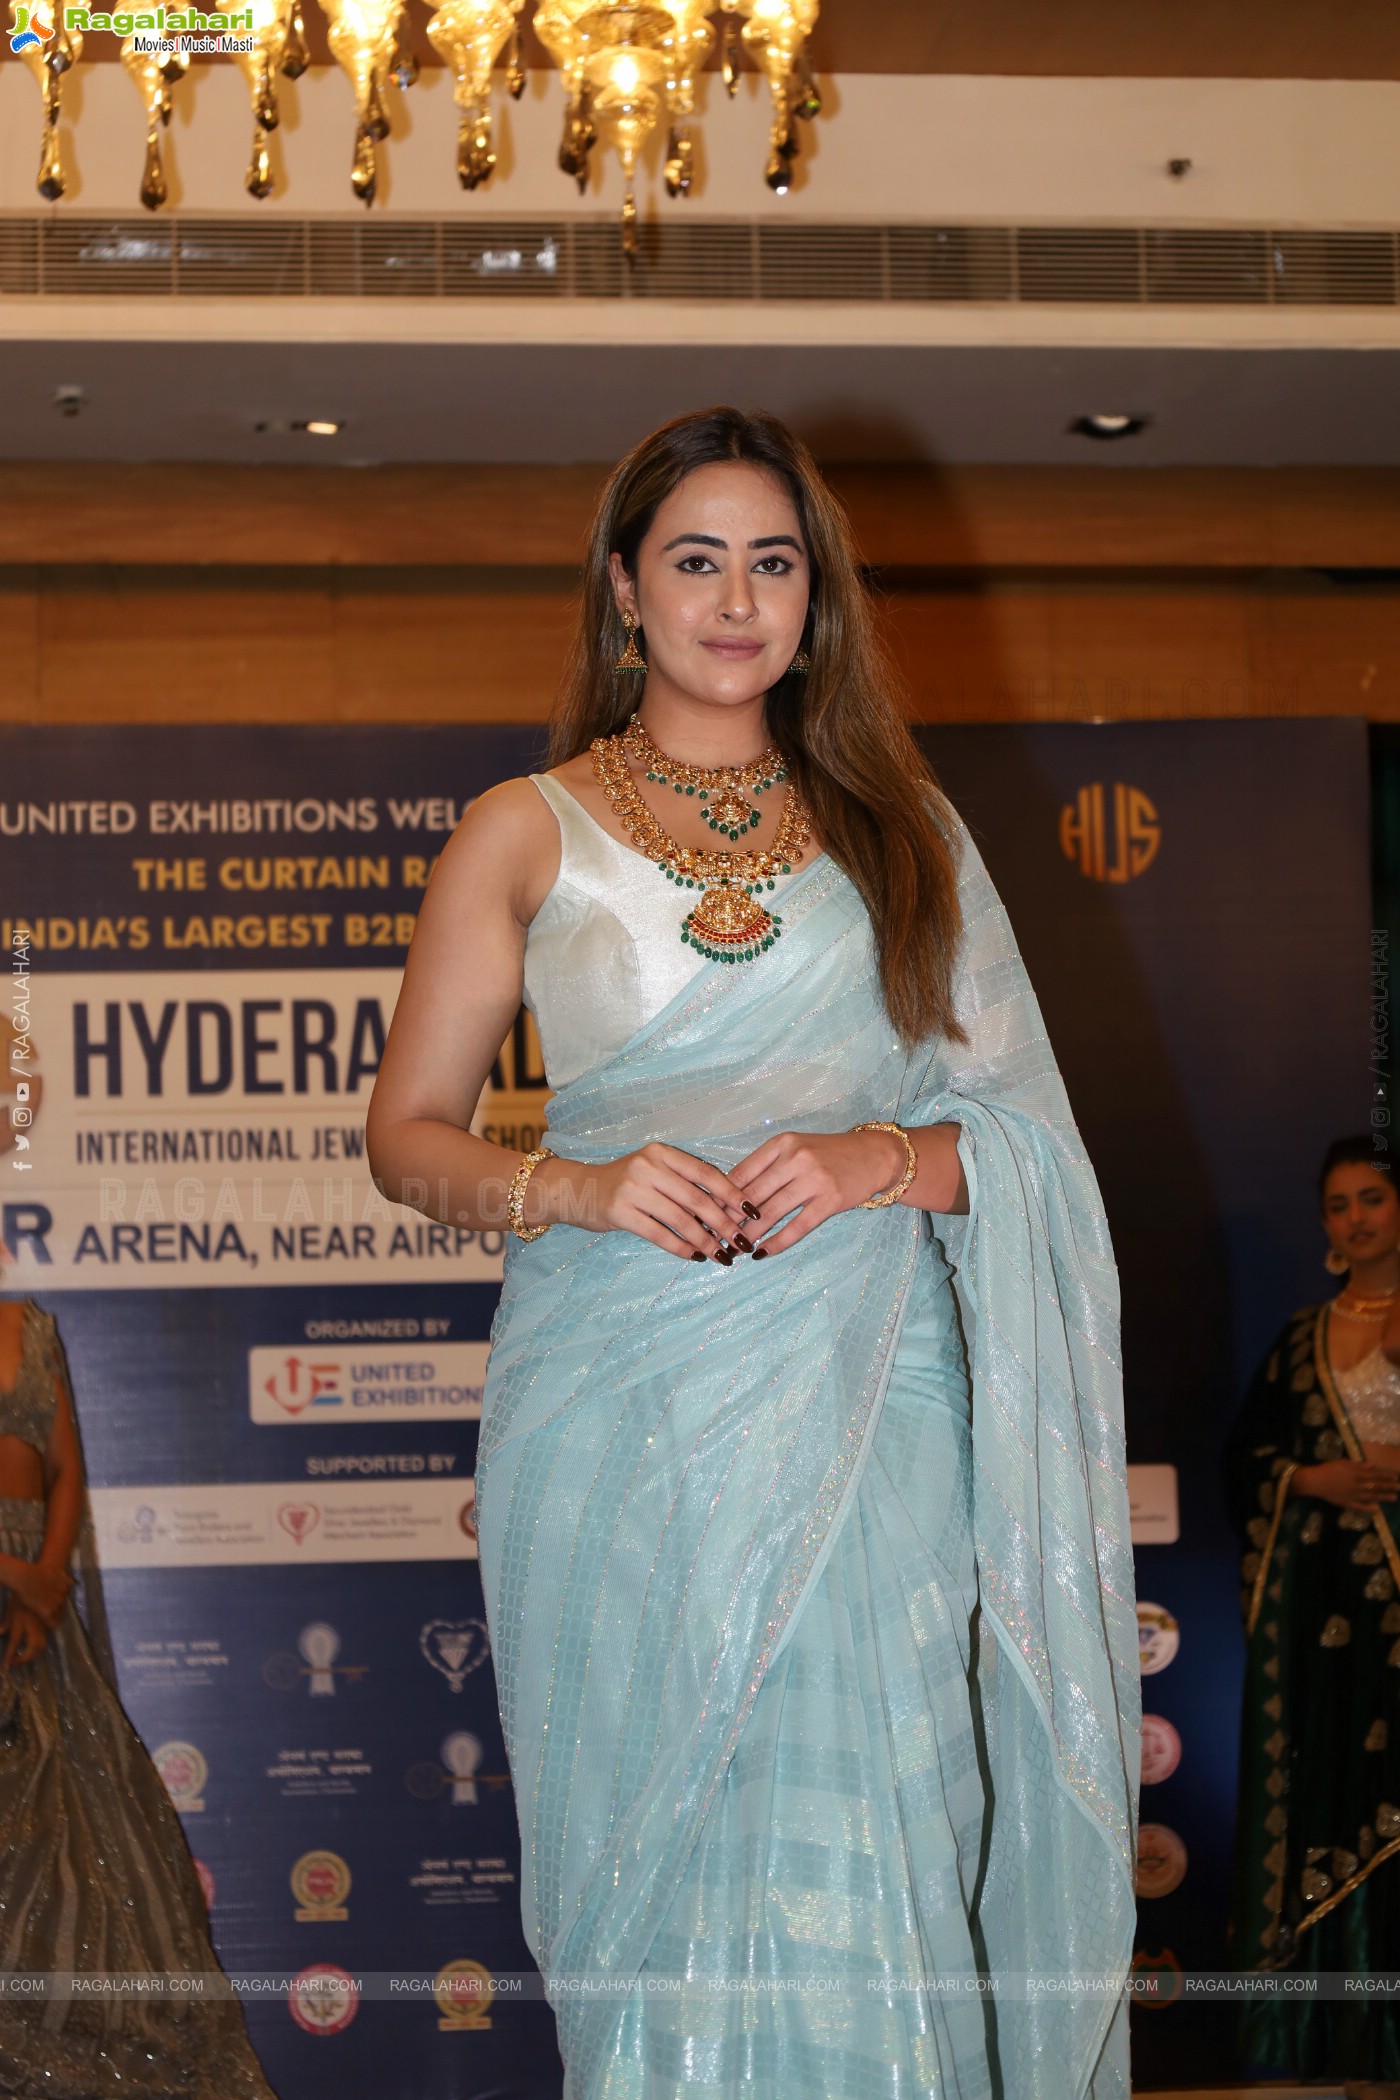 HIJS- Grand Date Announcement of South India’s Largest B2B Jewellery Exhibition